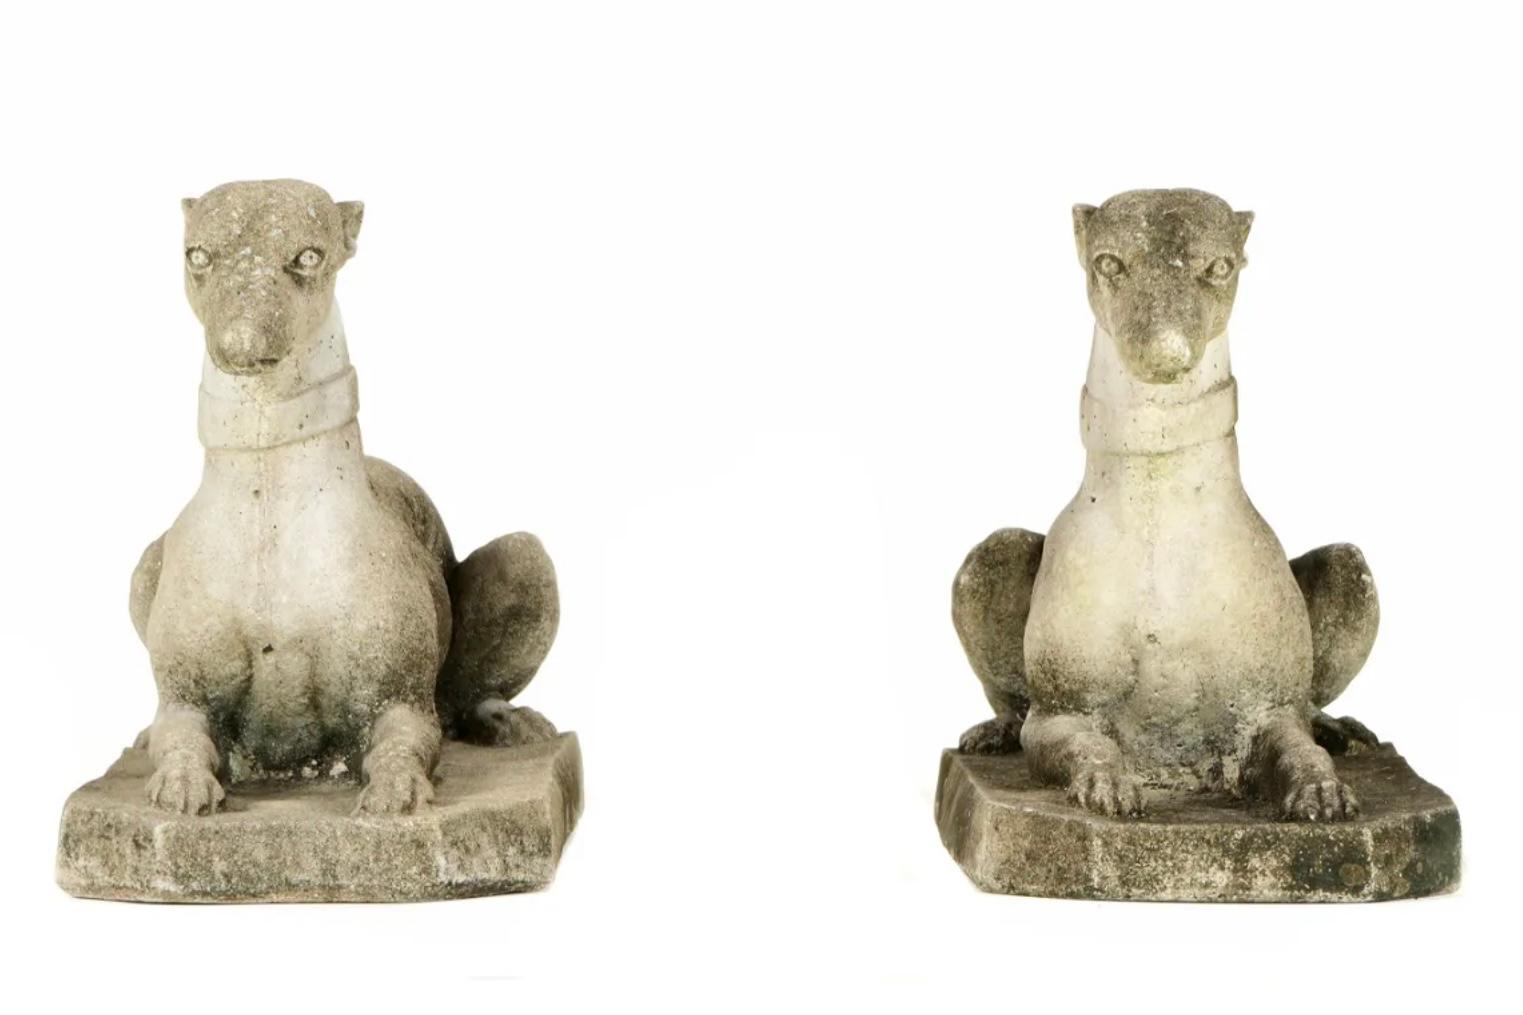 Pair of cast stone figural recumbent Italian Greyhound dogs with heads raised, alert and watchful. Dog figures rest on cast stone rectangular bases. Mossy growth enhances the features and makes these a great conversation piece for any garden or